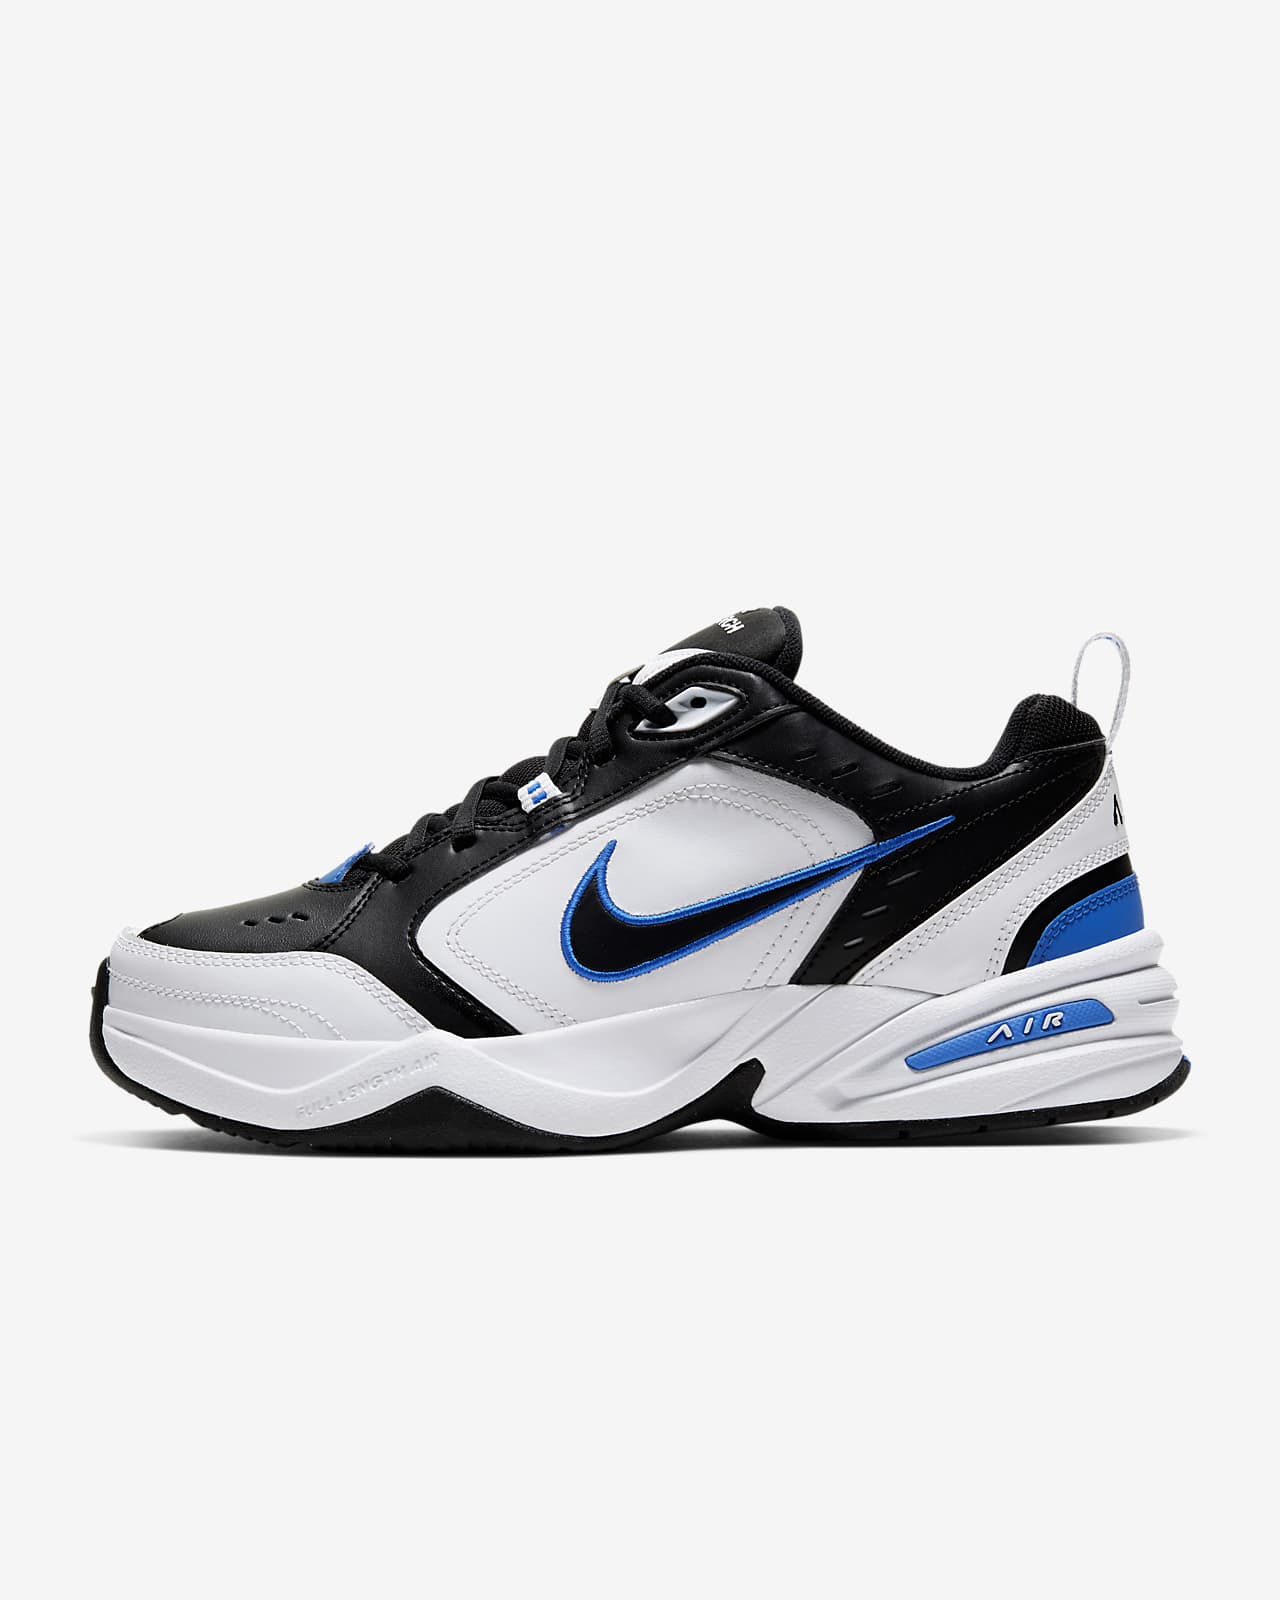 Grind excitation the mall Nike Air Monarch IV Men's Training Shoes. Nike.com